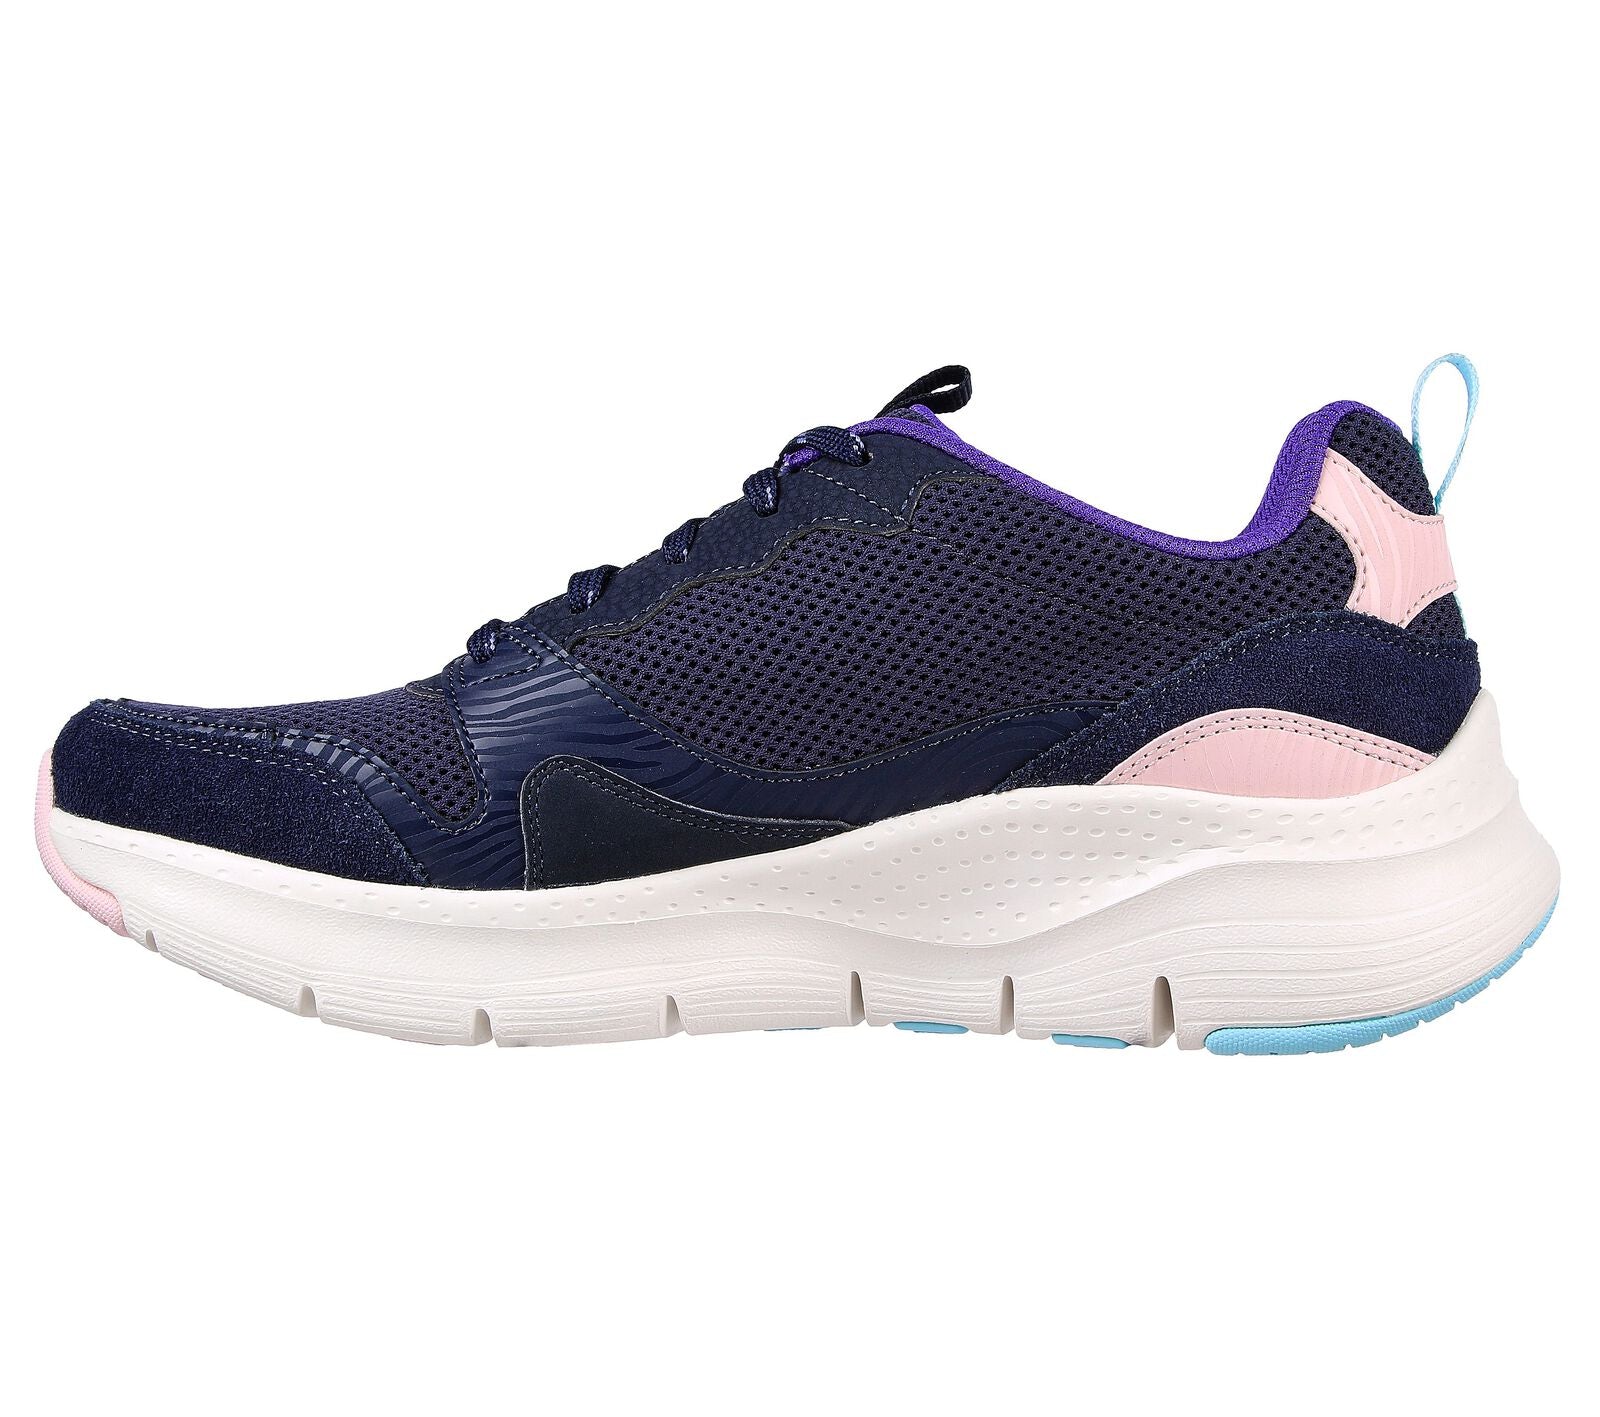 Skechers 149723 Arch Fit Vista View Ladies Navy Multi Leather & Textile Arch Support Lace Up Trainers